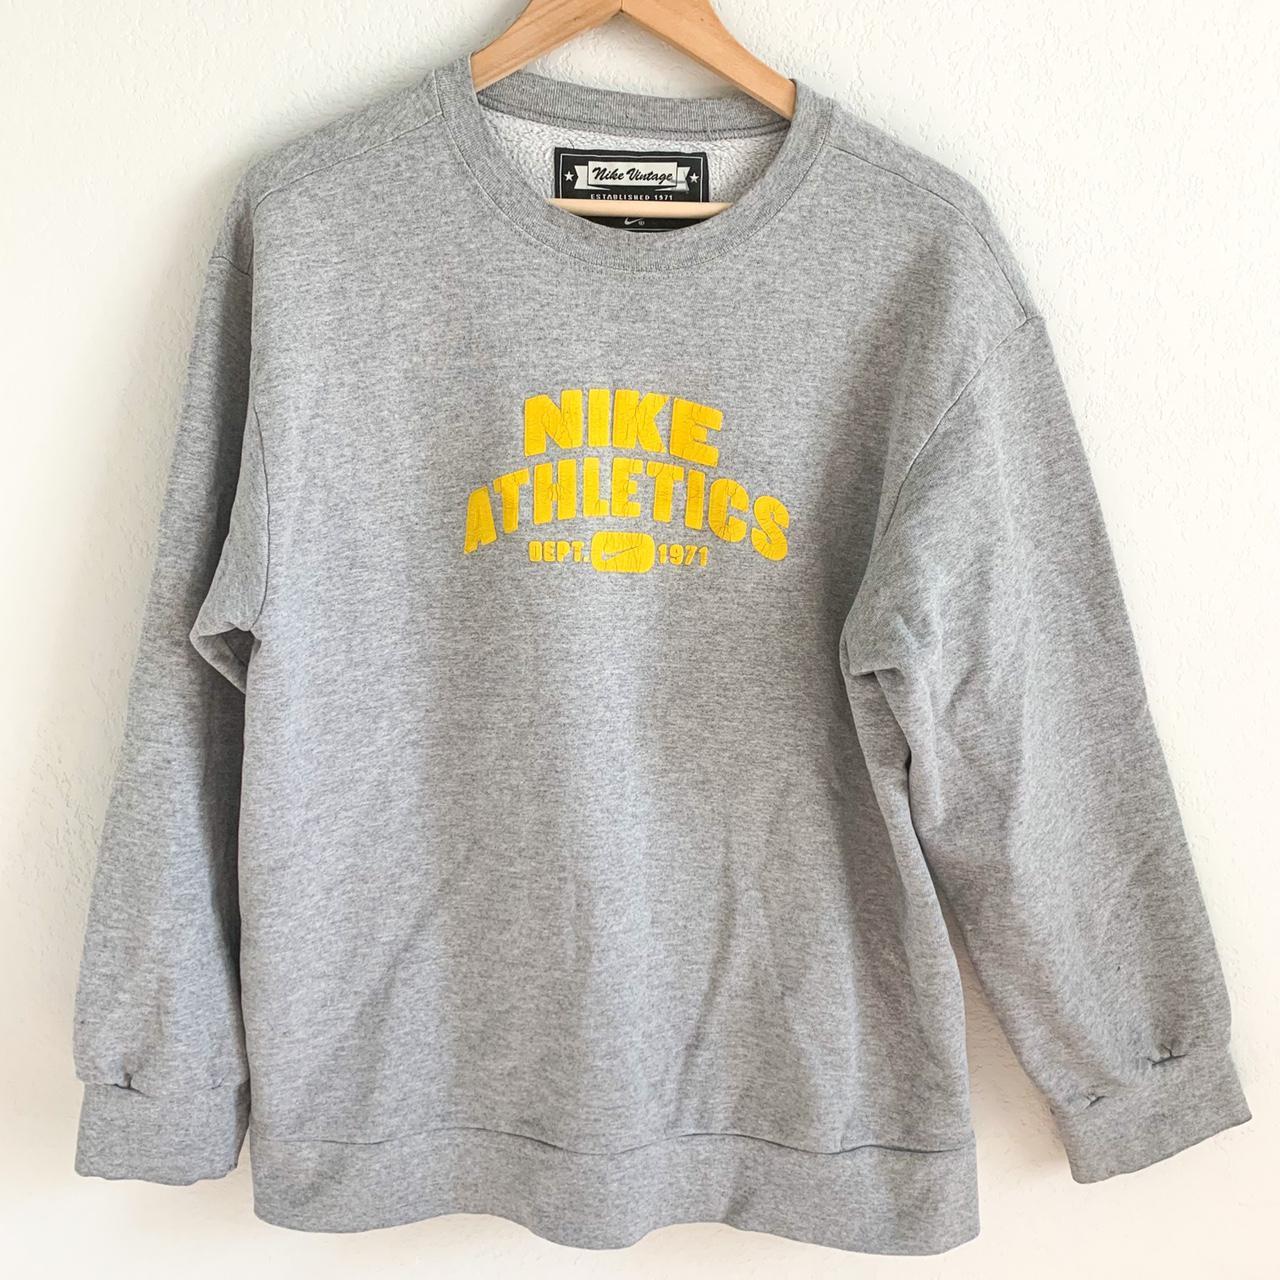 Nike Men's Grey and Yellow Jumper (3)